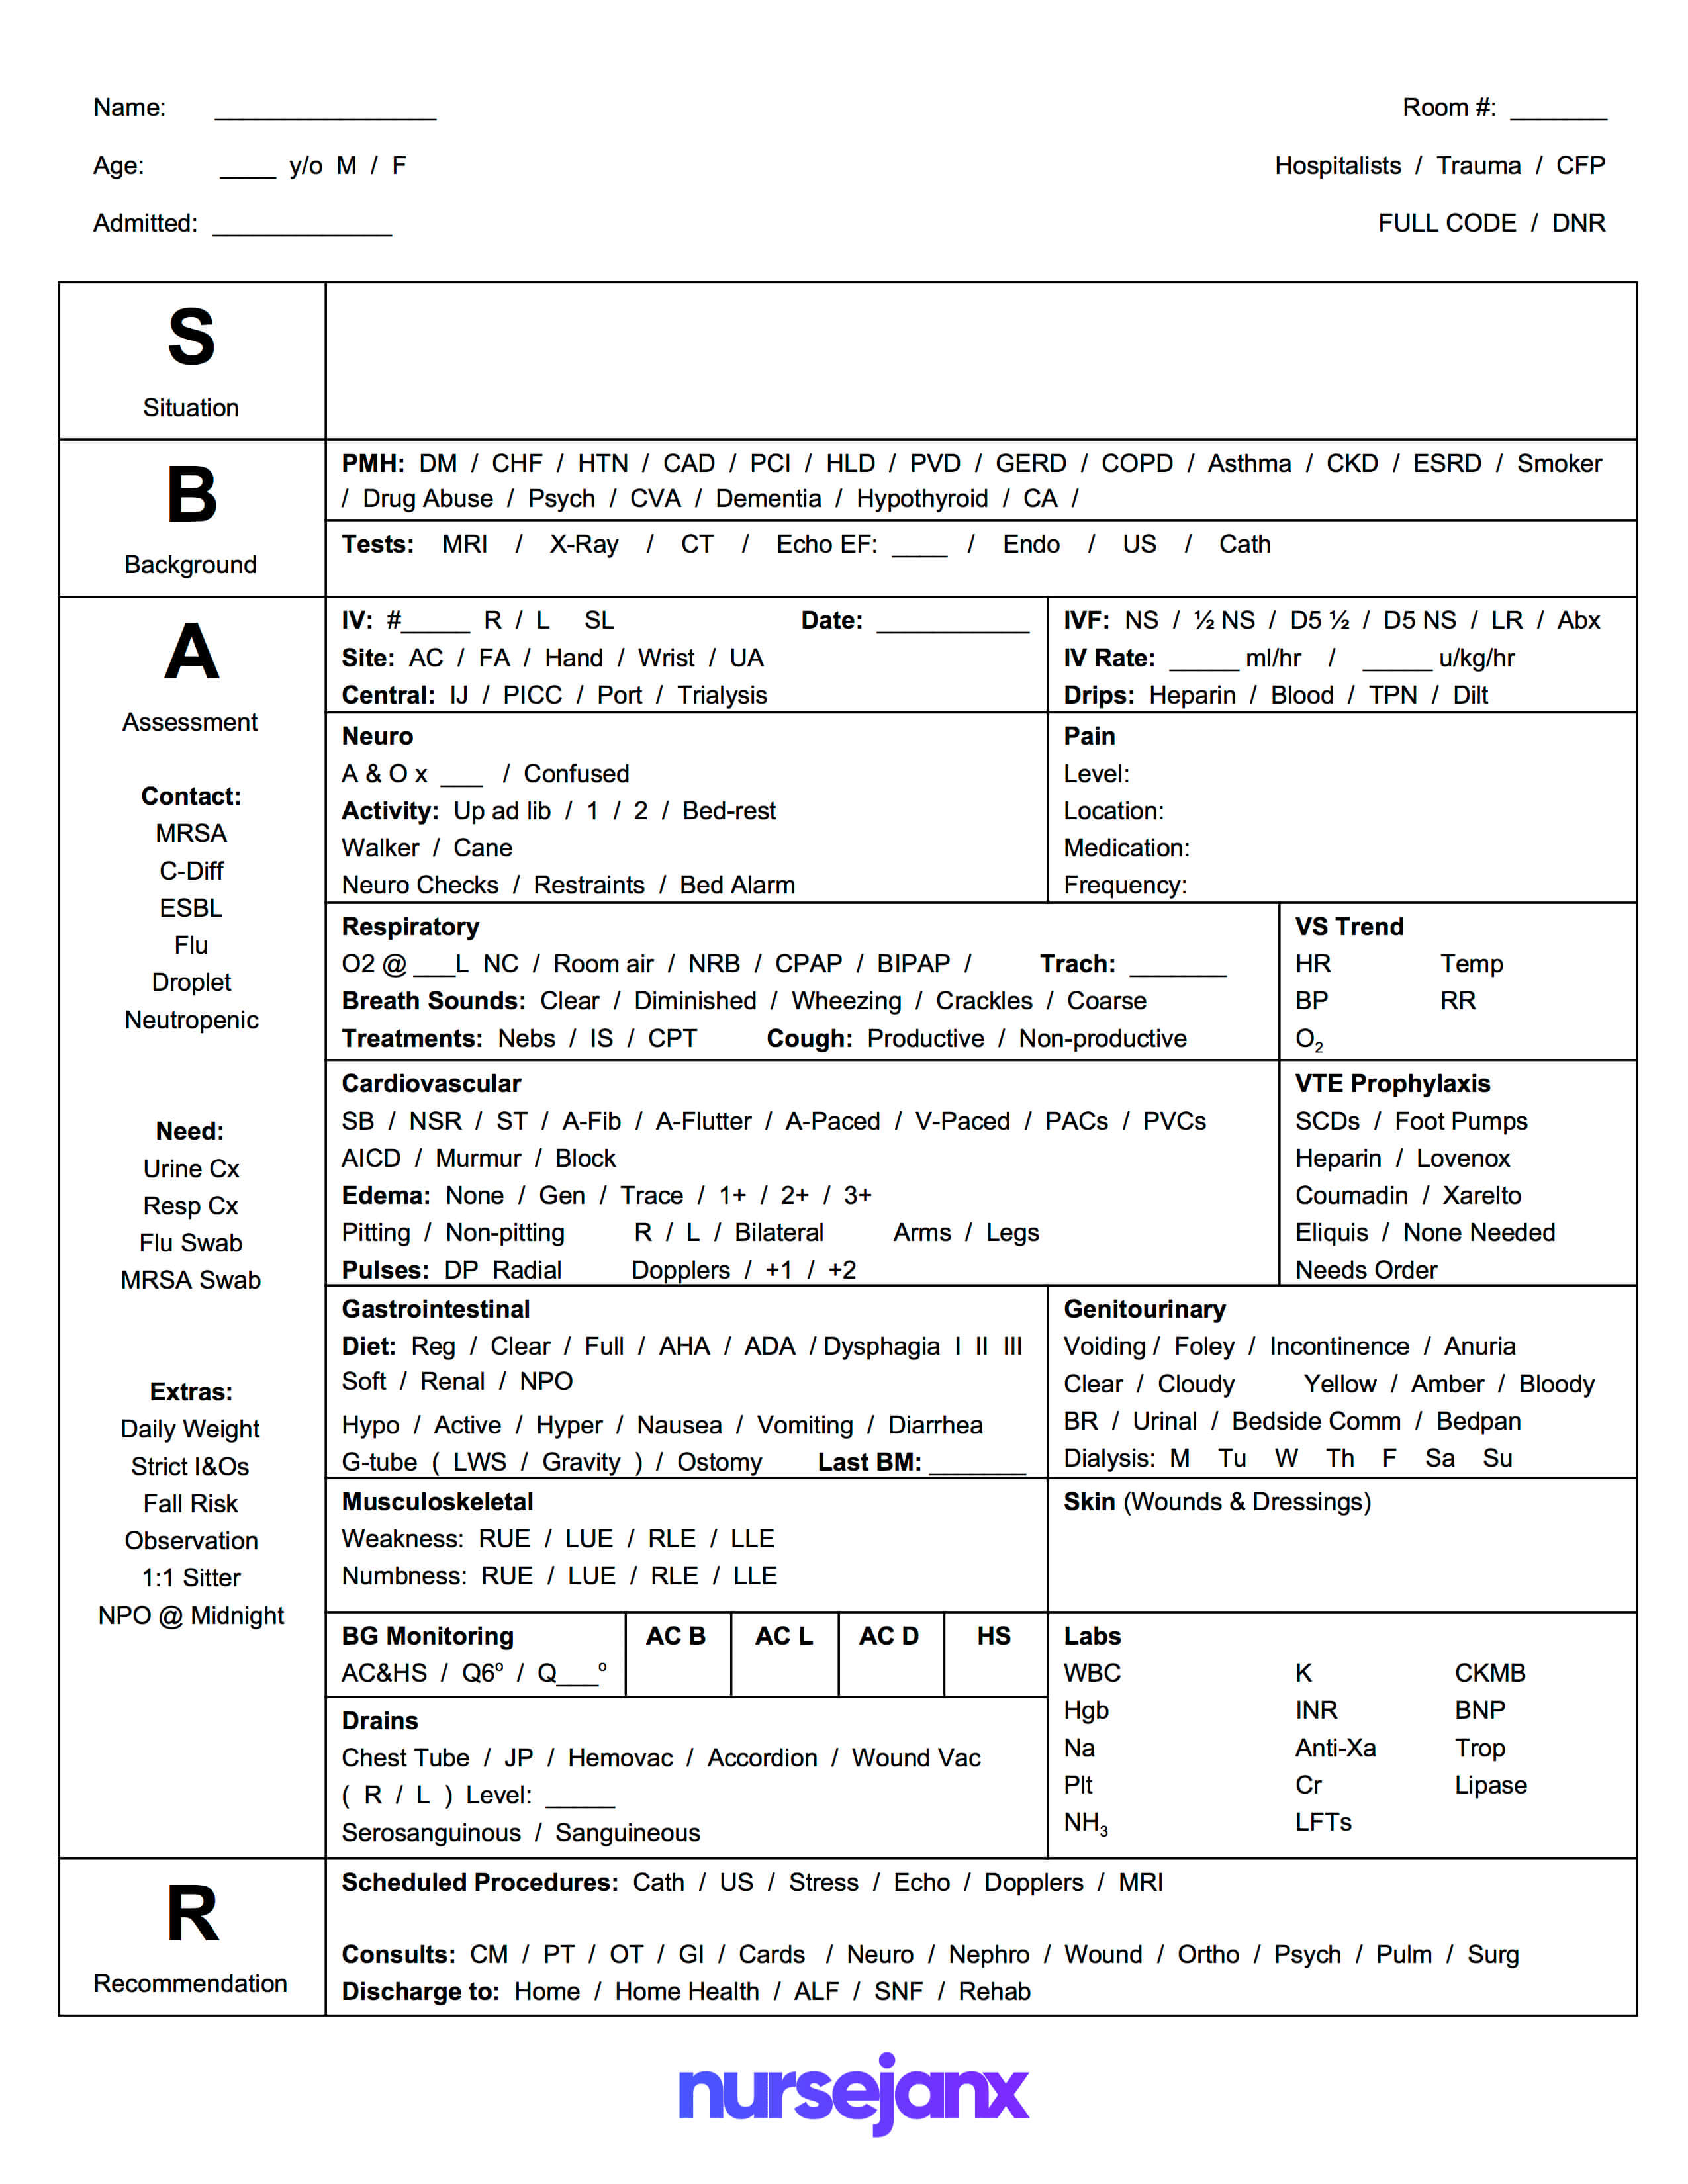 Free Download! This Is A Full Size Sbar Nursing Brain Report For Sbar Template Word